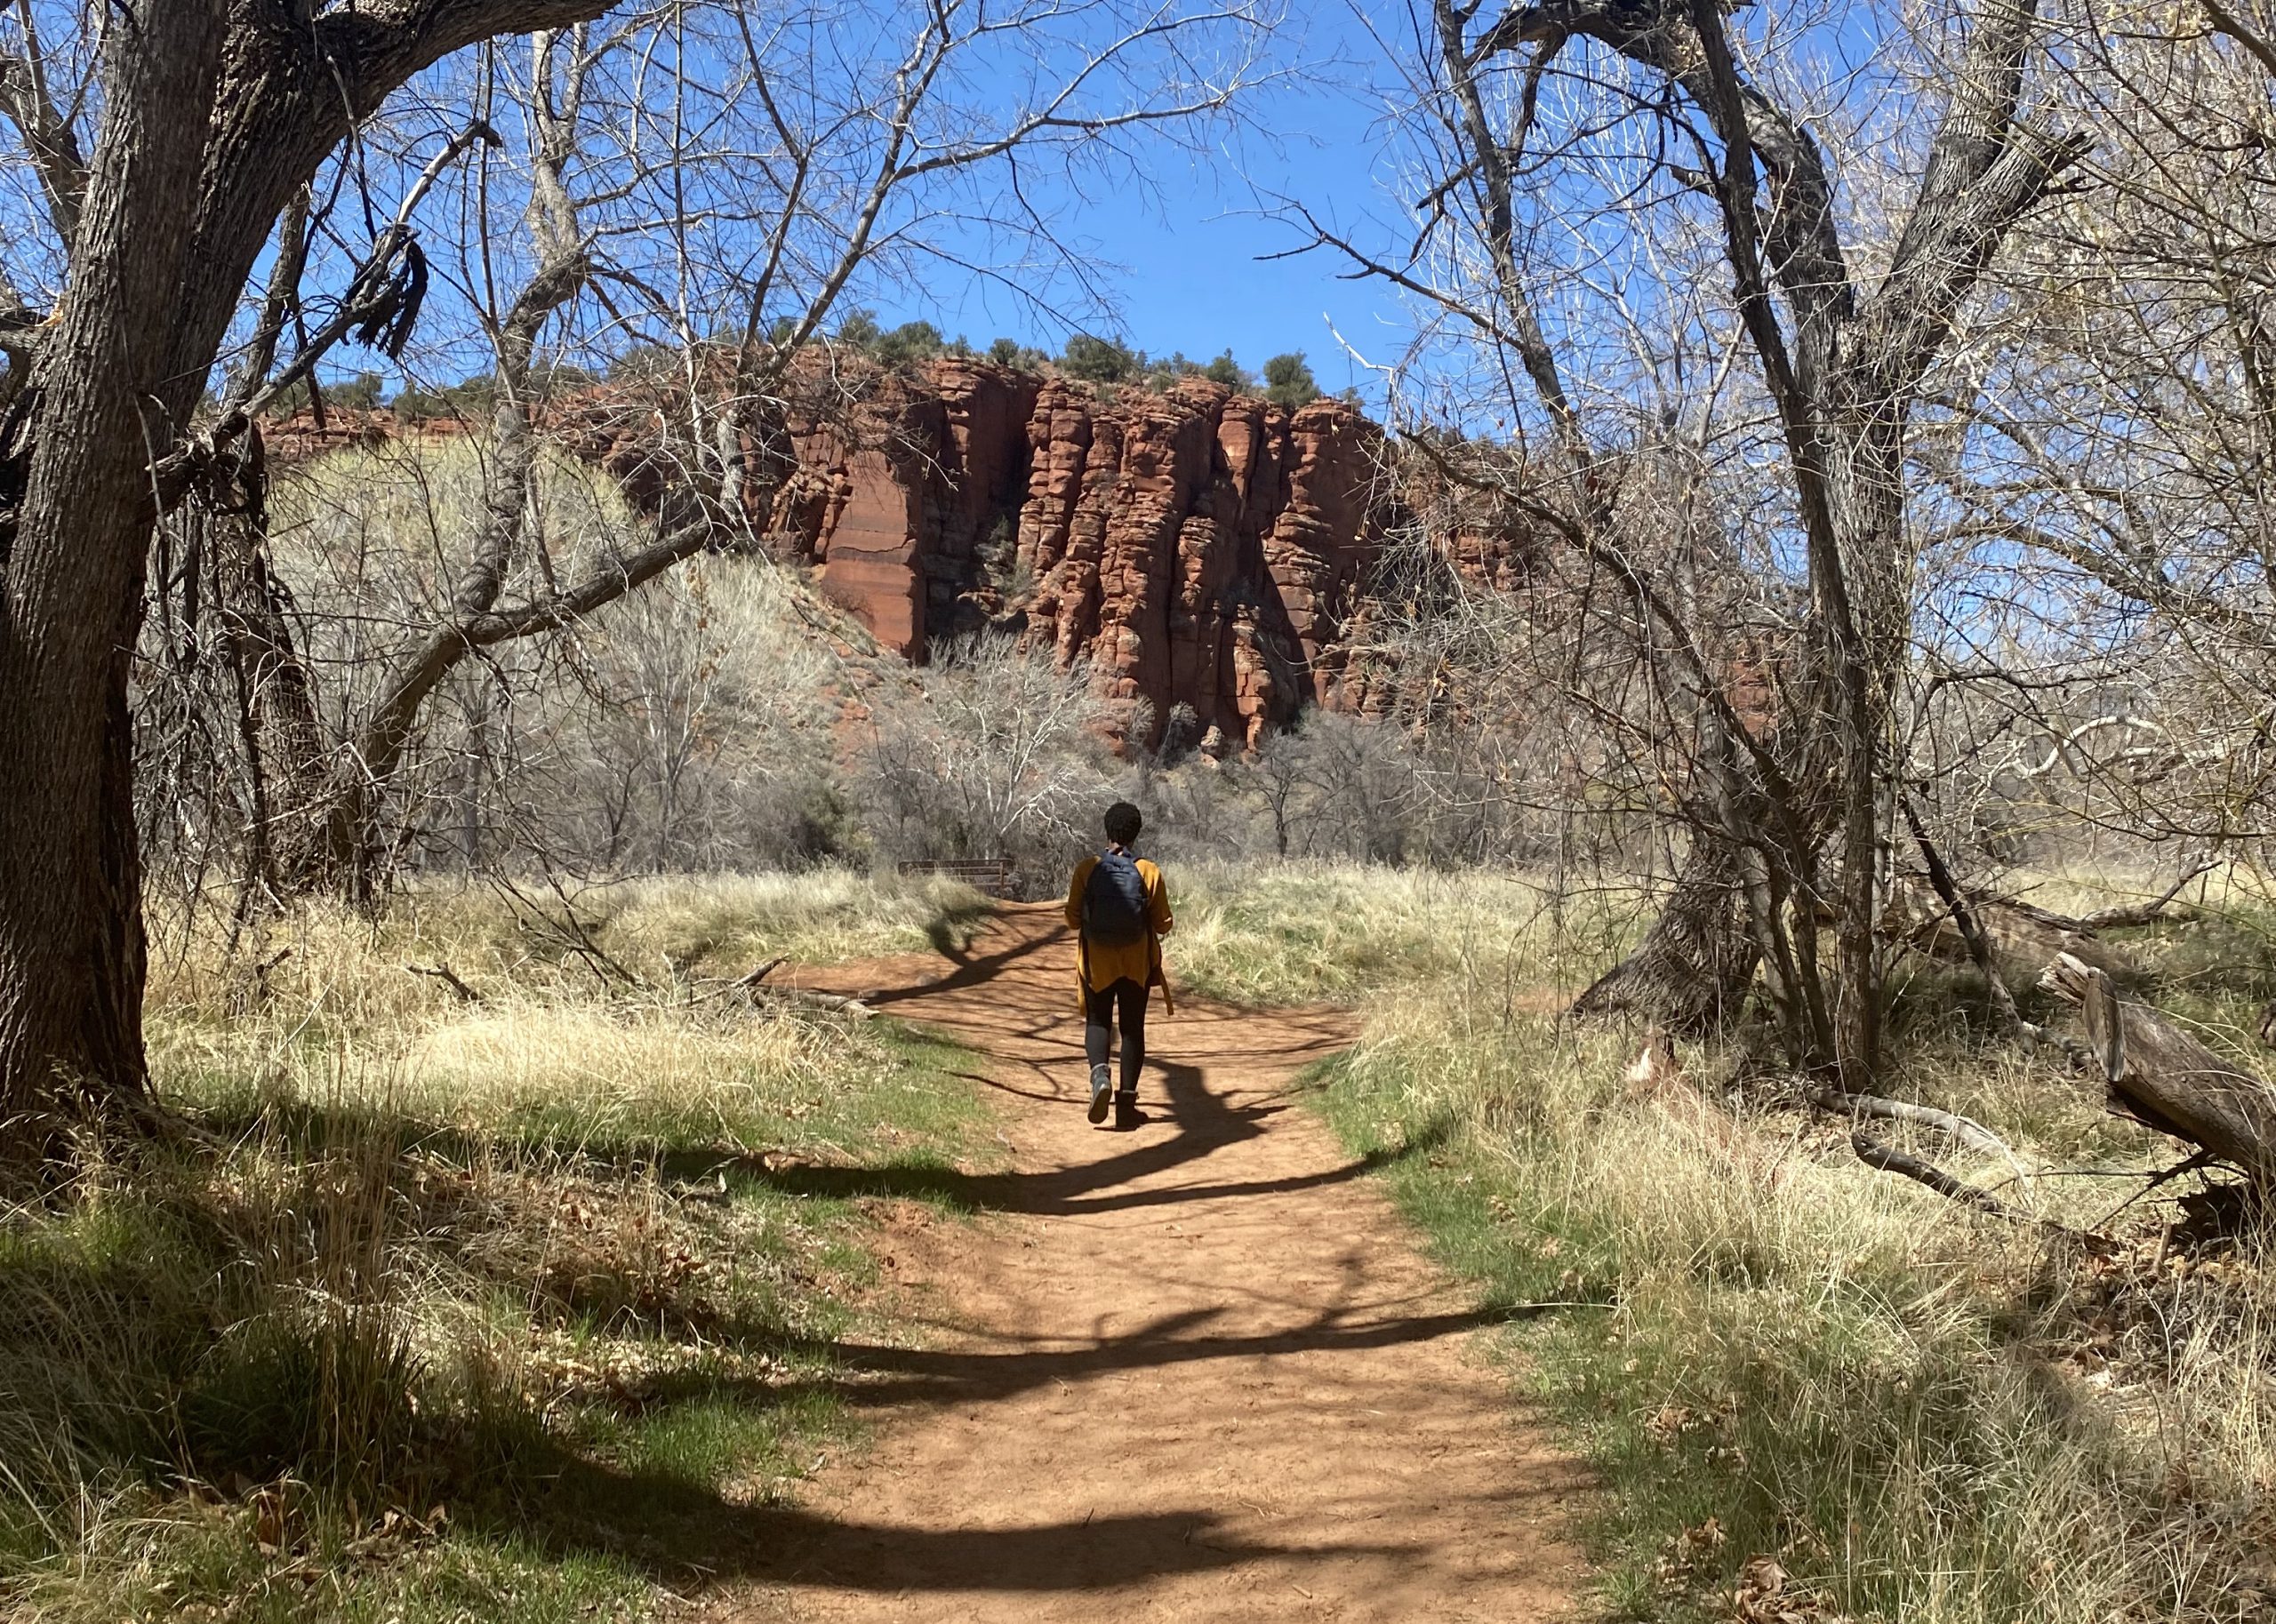 Image: Lauren walks along a trail in Sedona, Arizona in 2021. Above her is a blue sky, beside her are trees and grass, and in front of her are deep red rock formations. Photo courtesy of Lauren Williams.